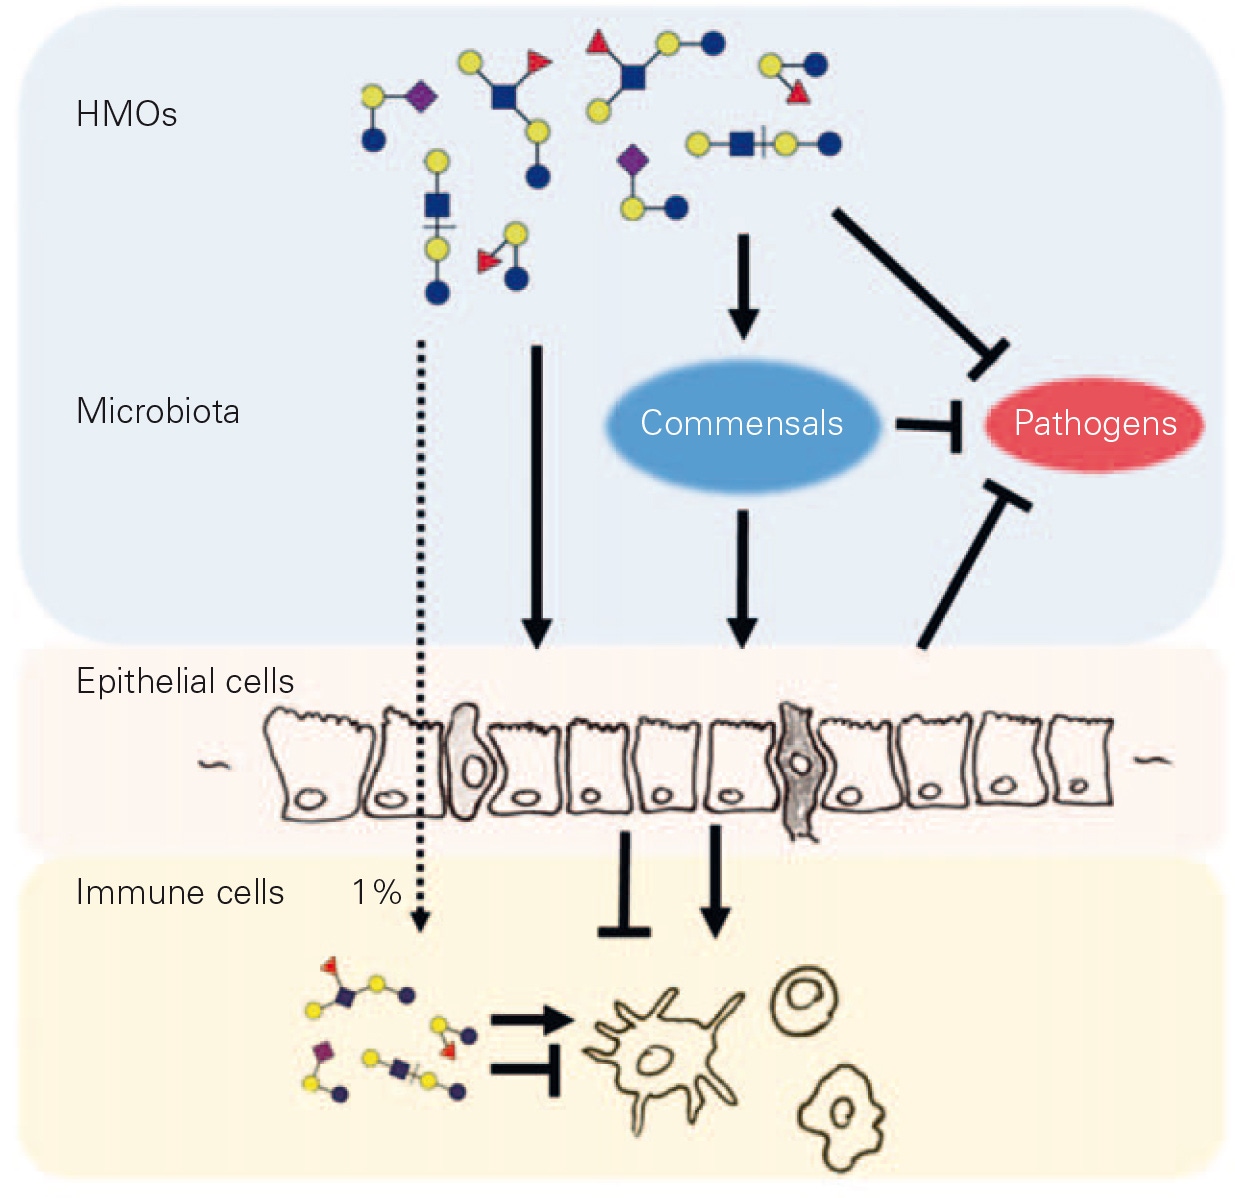 Illustration on how HMOs shape the intestinal environment through their effect on
commensals, pathogens, and the mucosal immune system from the epithelium to the
underlying immune cells